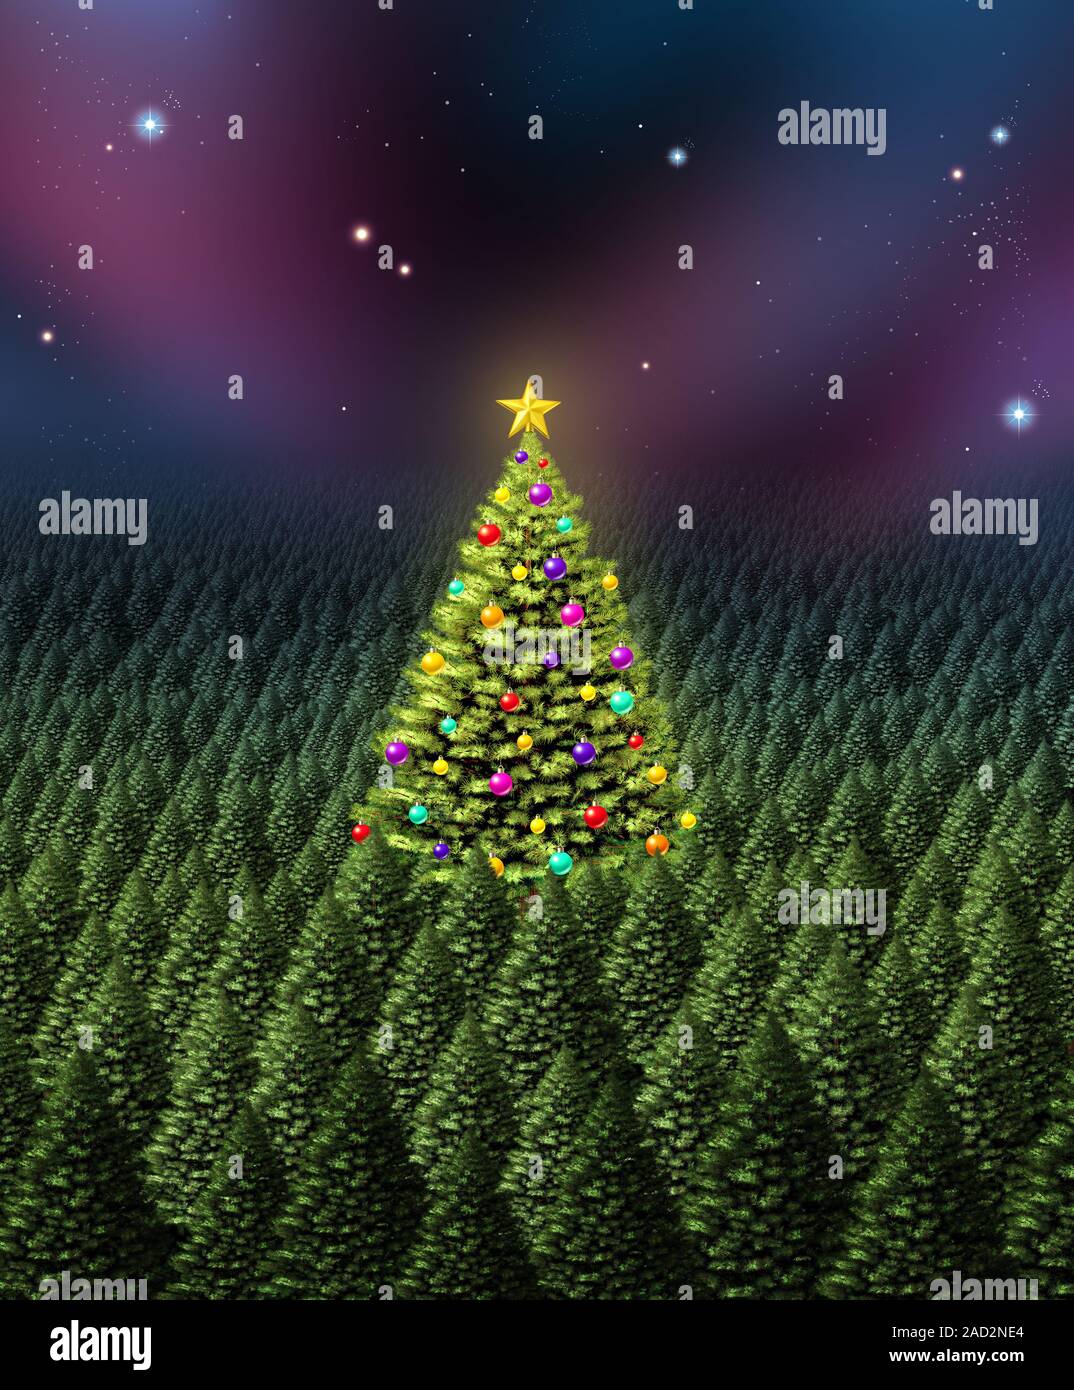 Christmas tree greeting card concept as a dense forest of pine with one individual plant decorated with ornaments as a shinning star. Stock Photo